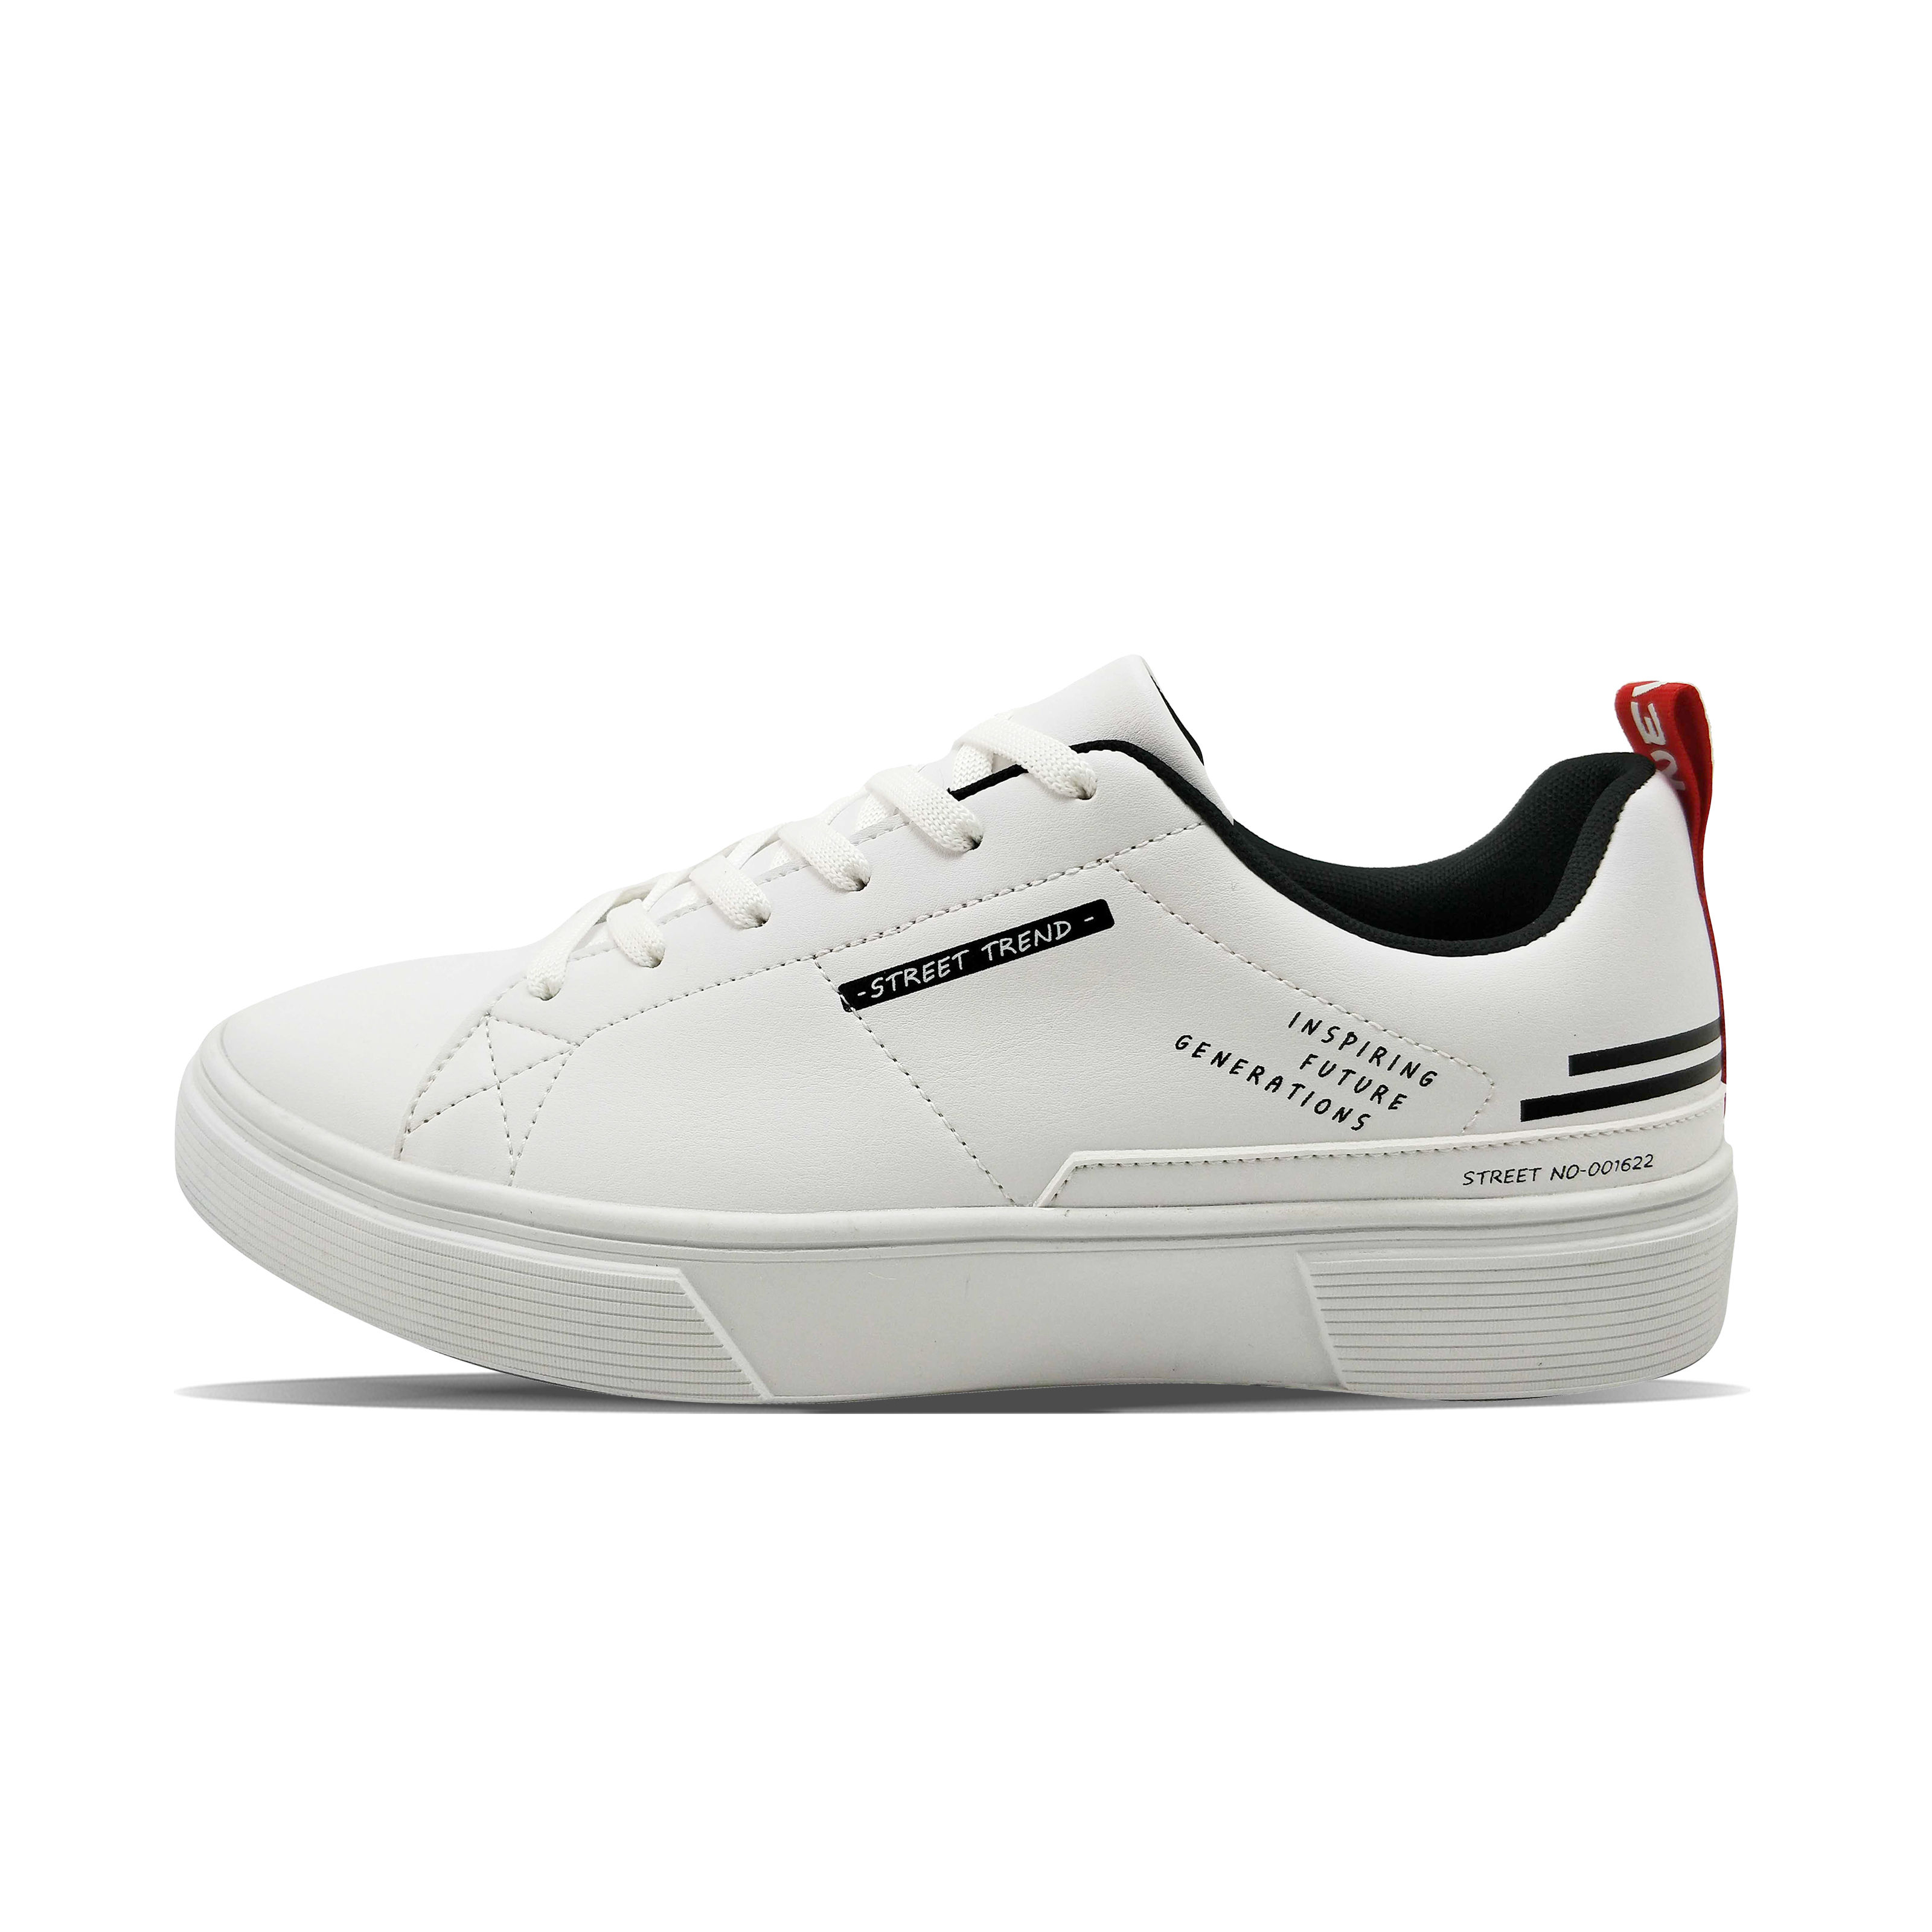 Affordable white men’s casual best factory men’s board shoes suppliers in China